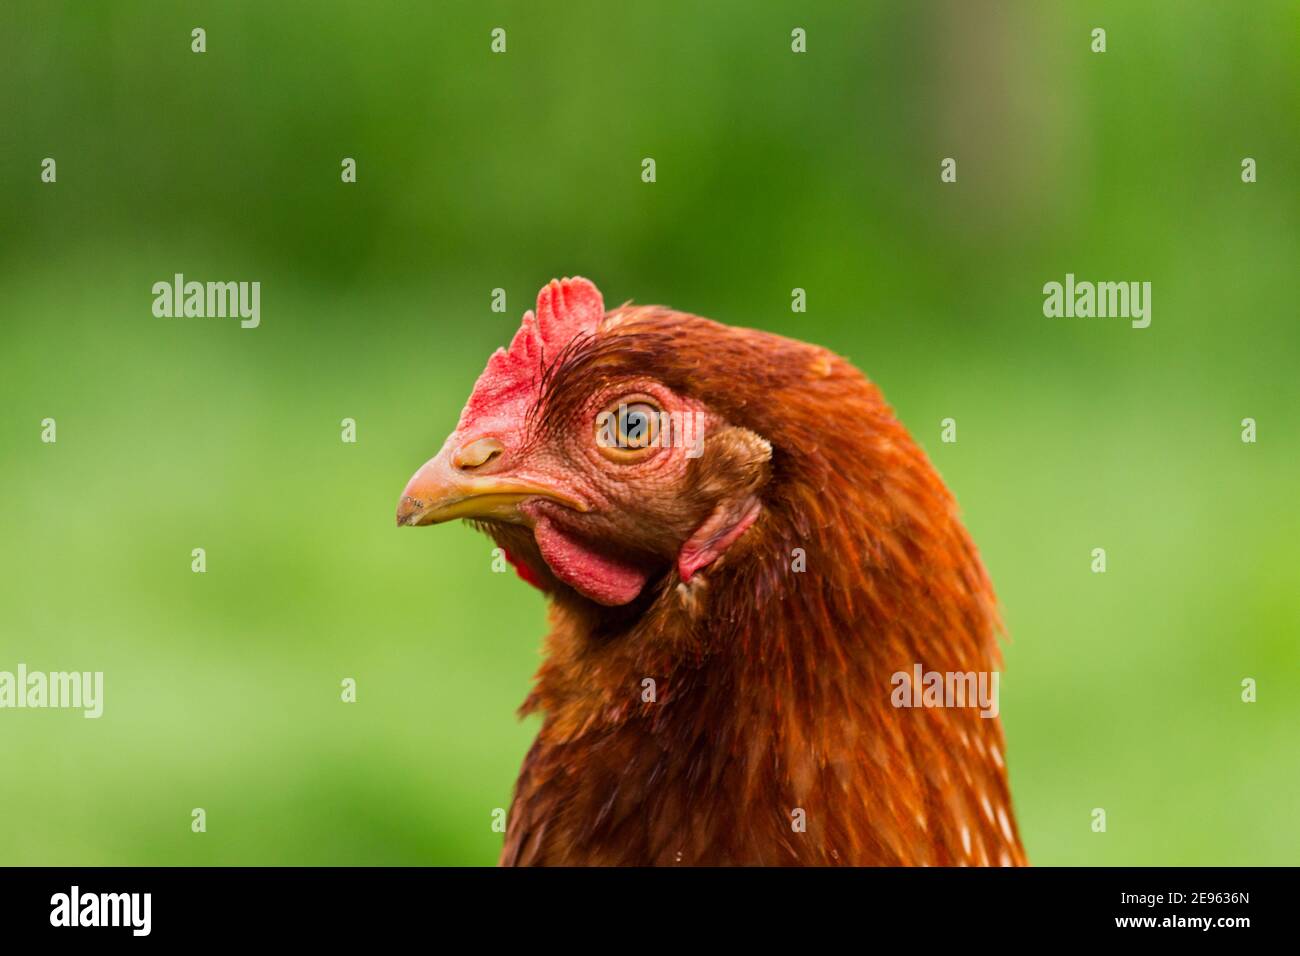 Hens feed on the traditional rural barnyard at sunny day. Detail of hen head. Chickens sitting in henhouse. Close up of chicken standing on barn yard Stock Photo